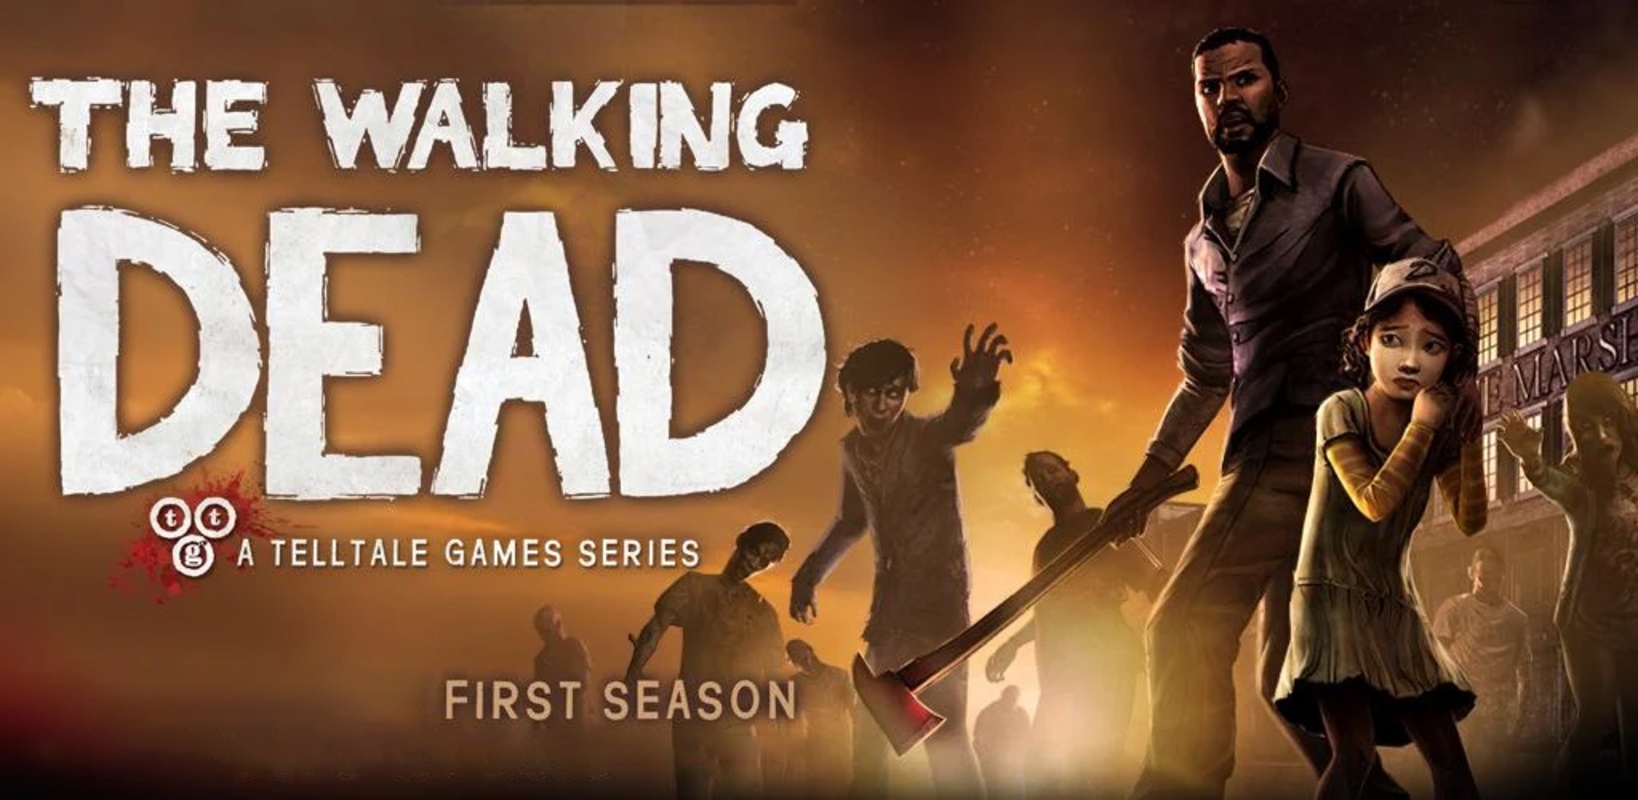 The Walking Dead: Season One 1.20 APK for Android Screenshot 1